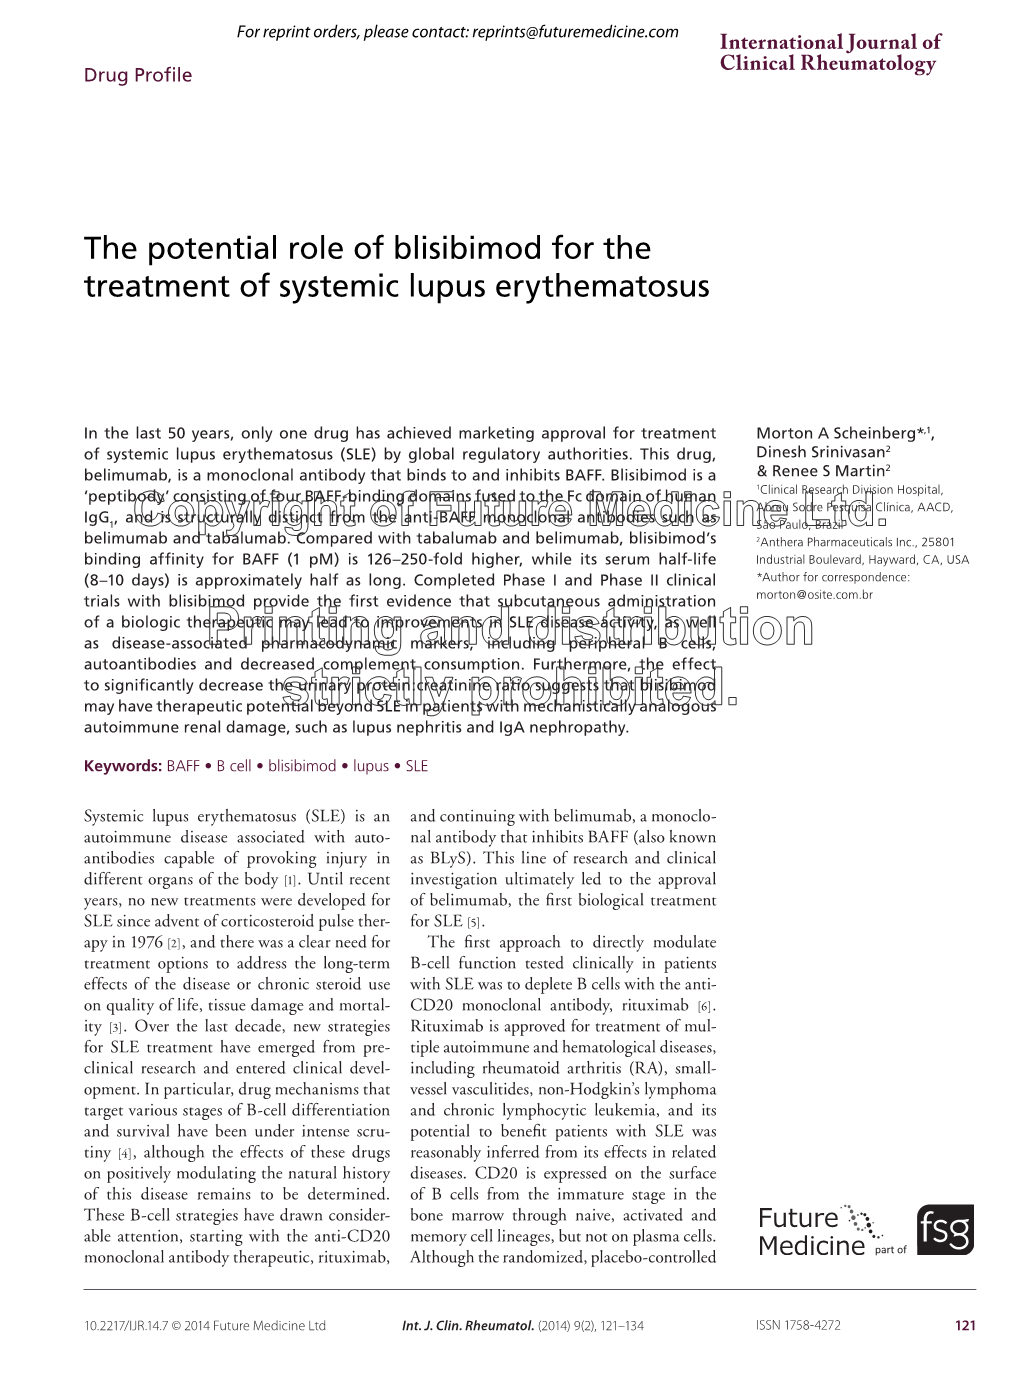 The Potential Role of Blisibimod for the Treatment of Systemic Lupus Erythematosus